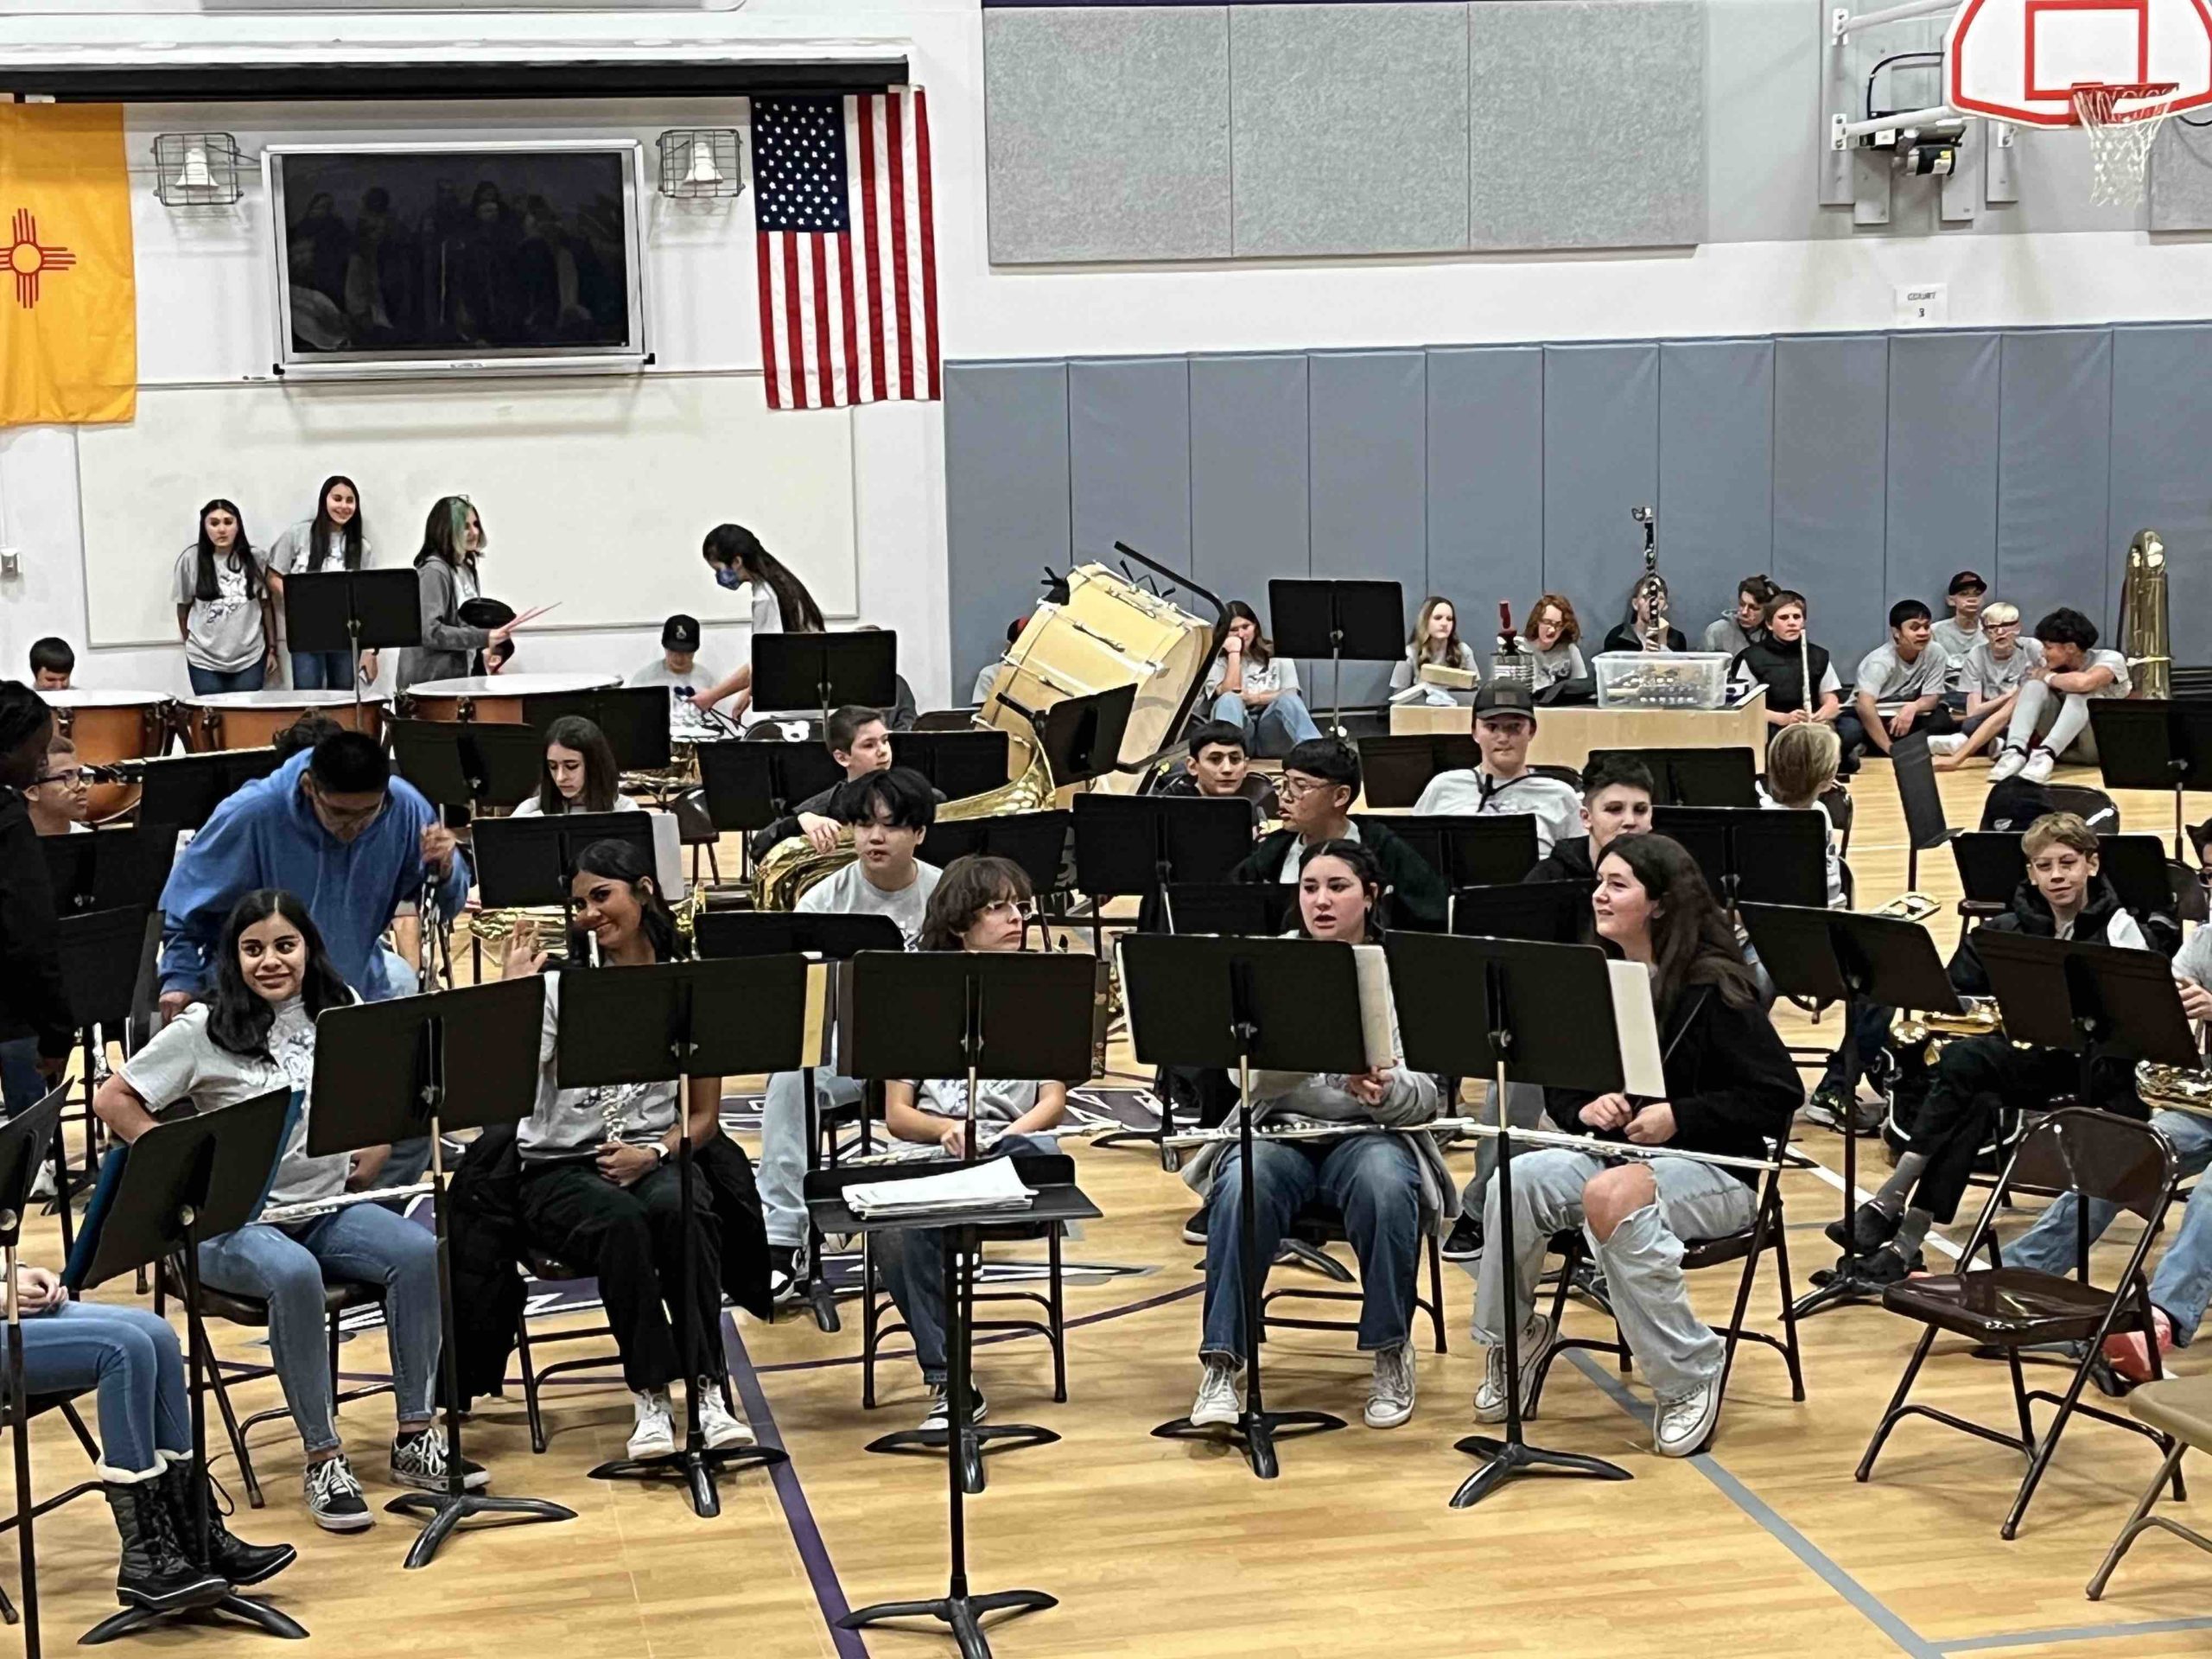 Madison MIddle School band performance Dec. 1, 2022 - 14